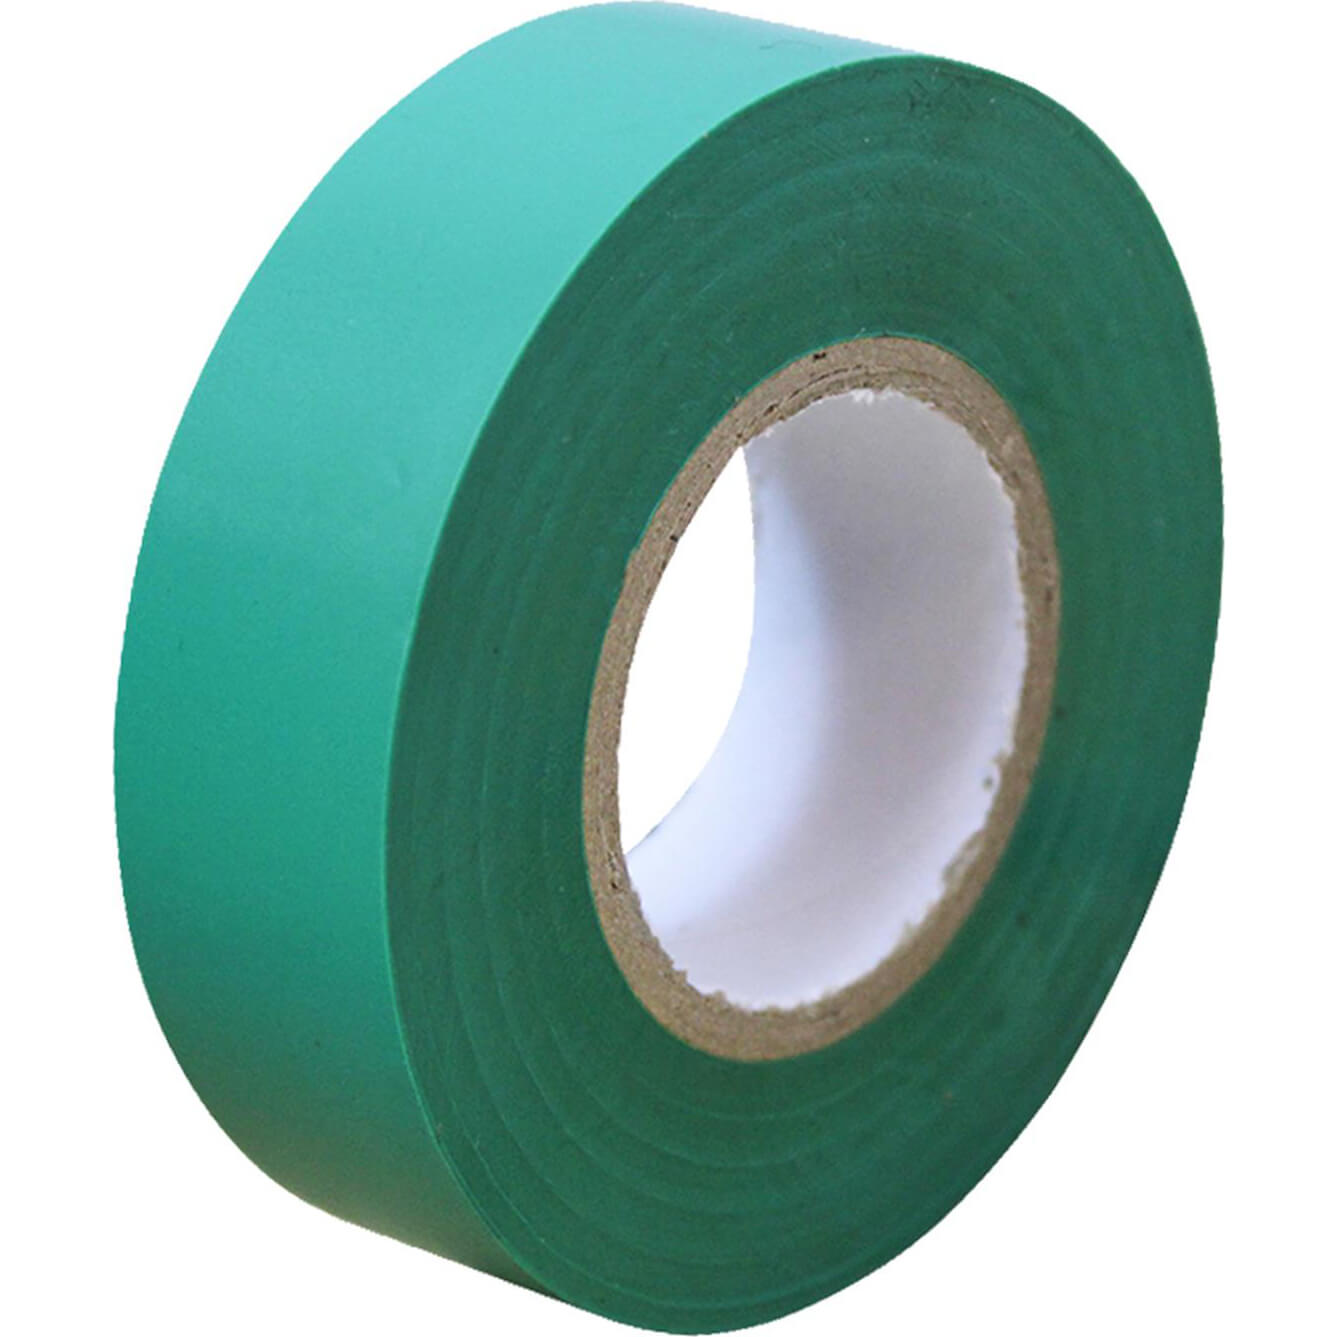 Insulation Tape Green 19mm Wide x 33m Roll